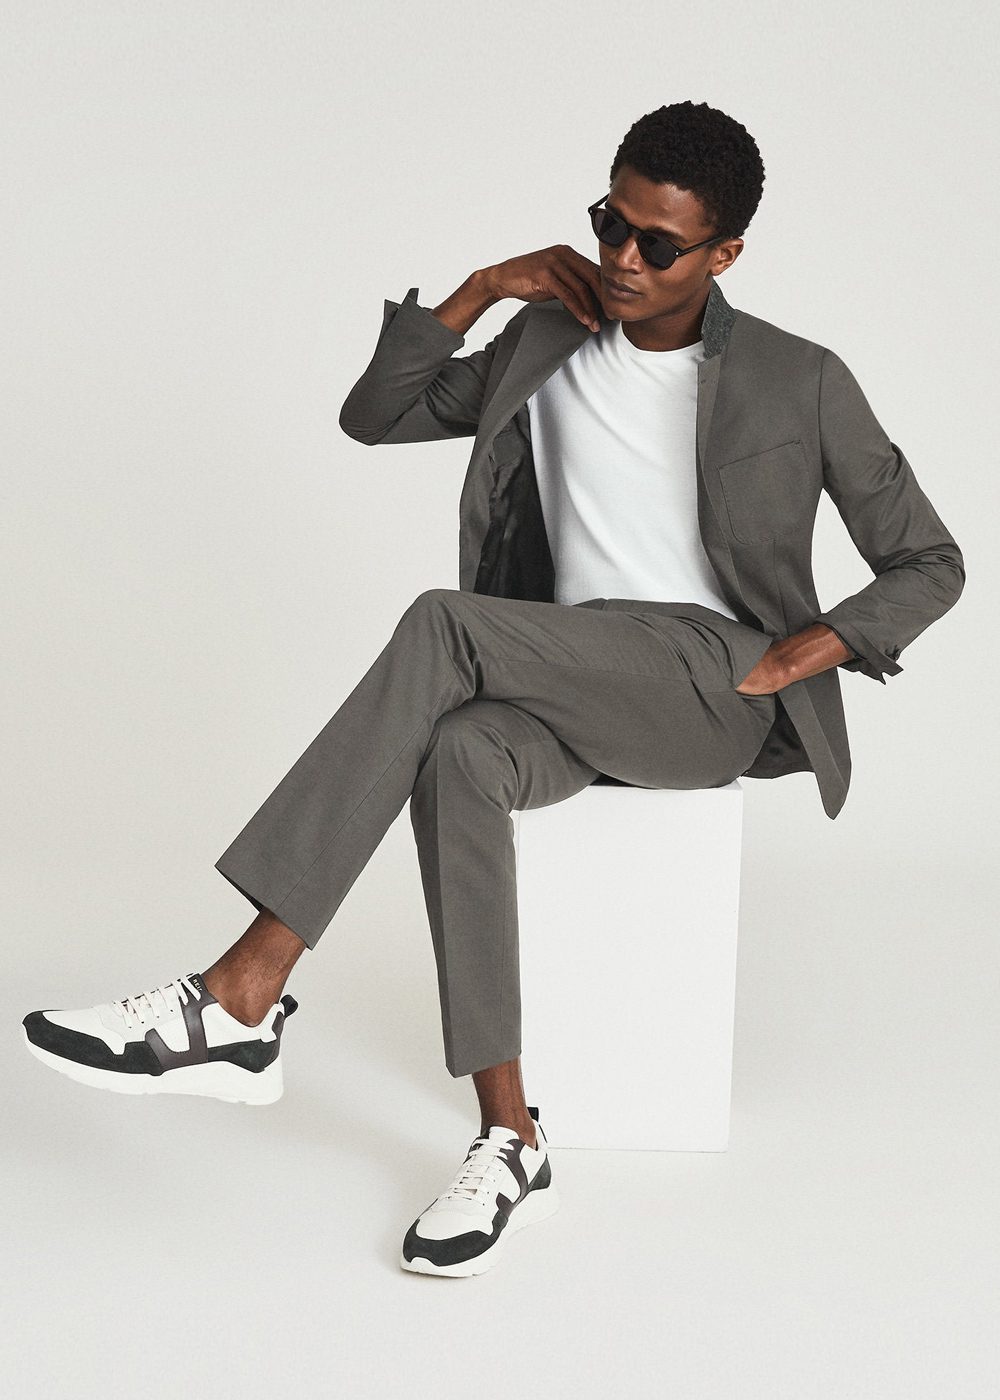 How to Wear a Suit with Sneakers in 2023: A Visual Guide